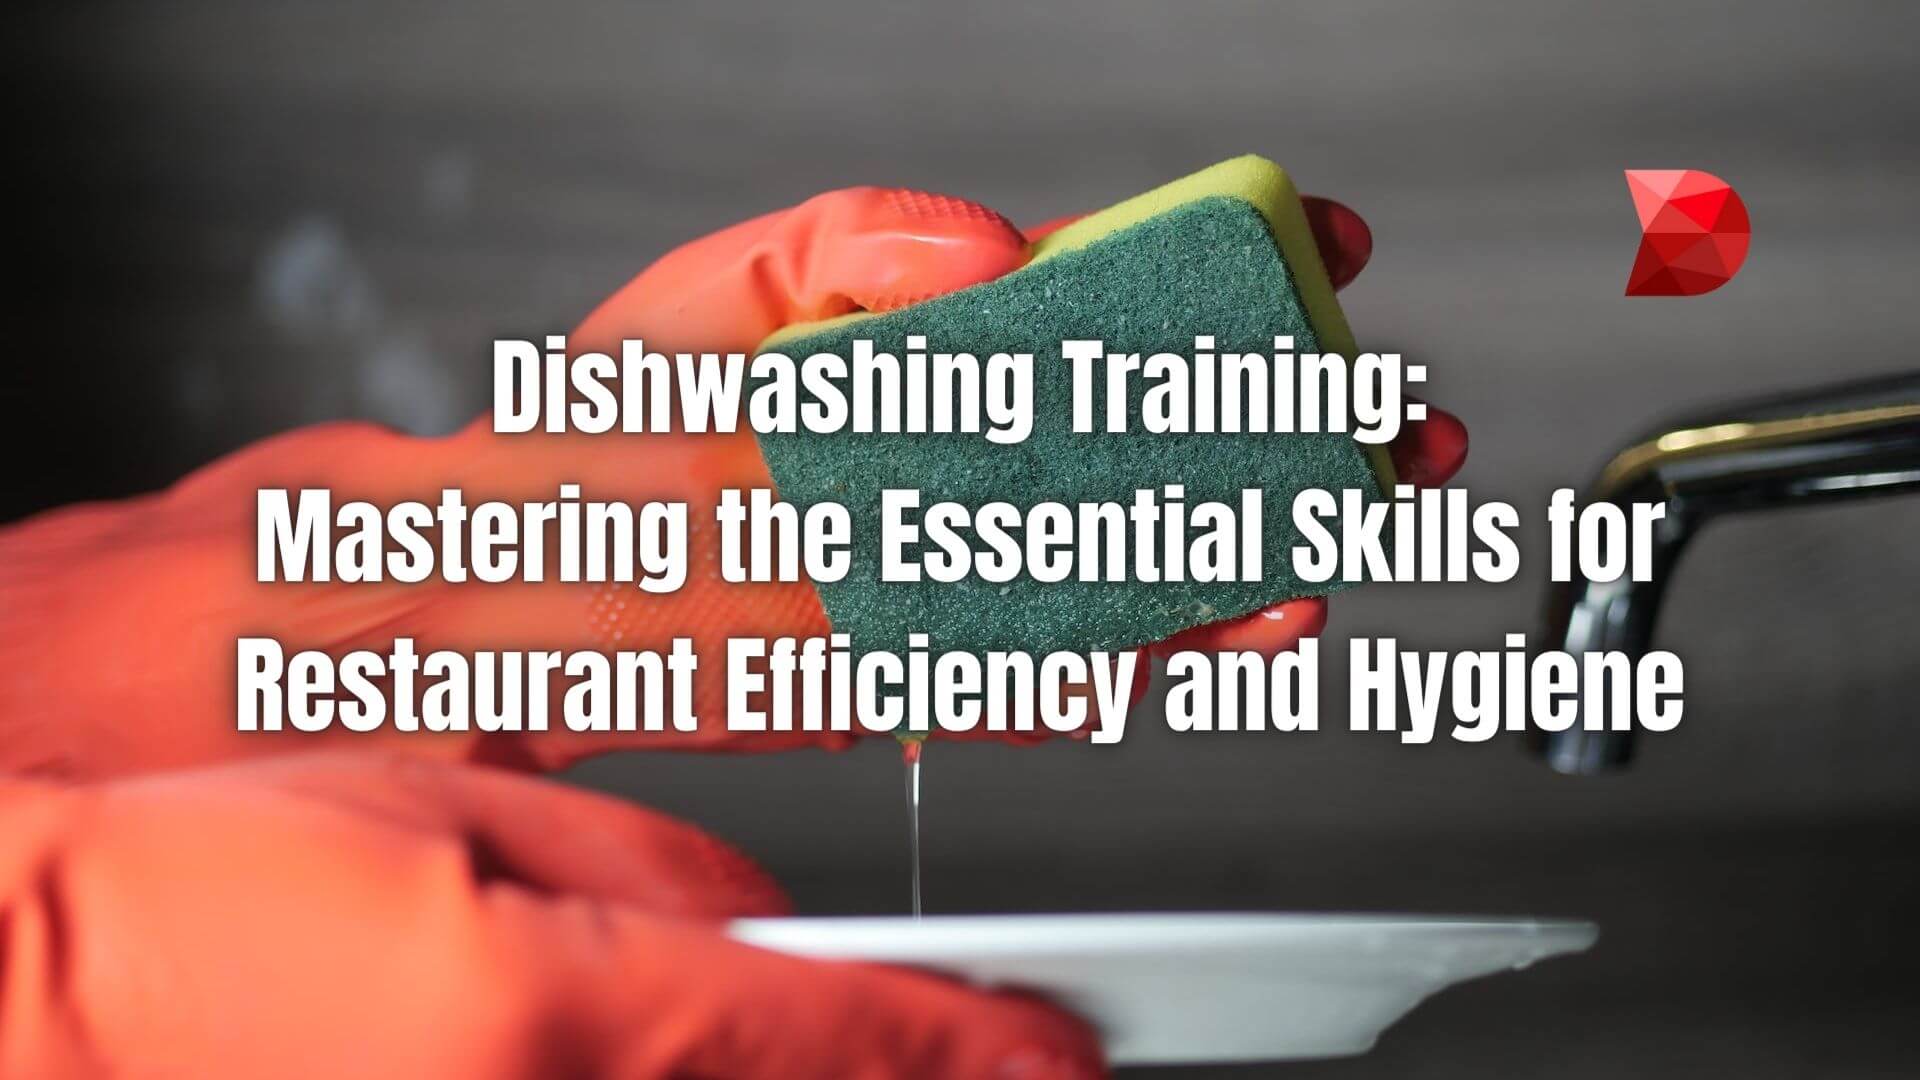 Discover expert tips and methods in this ultimate dishwashing training guide. Click here to learn expert tips, techniques, and strategies.